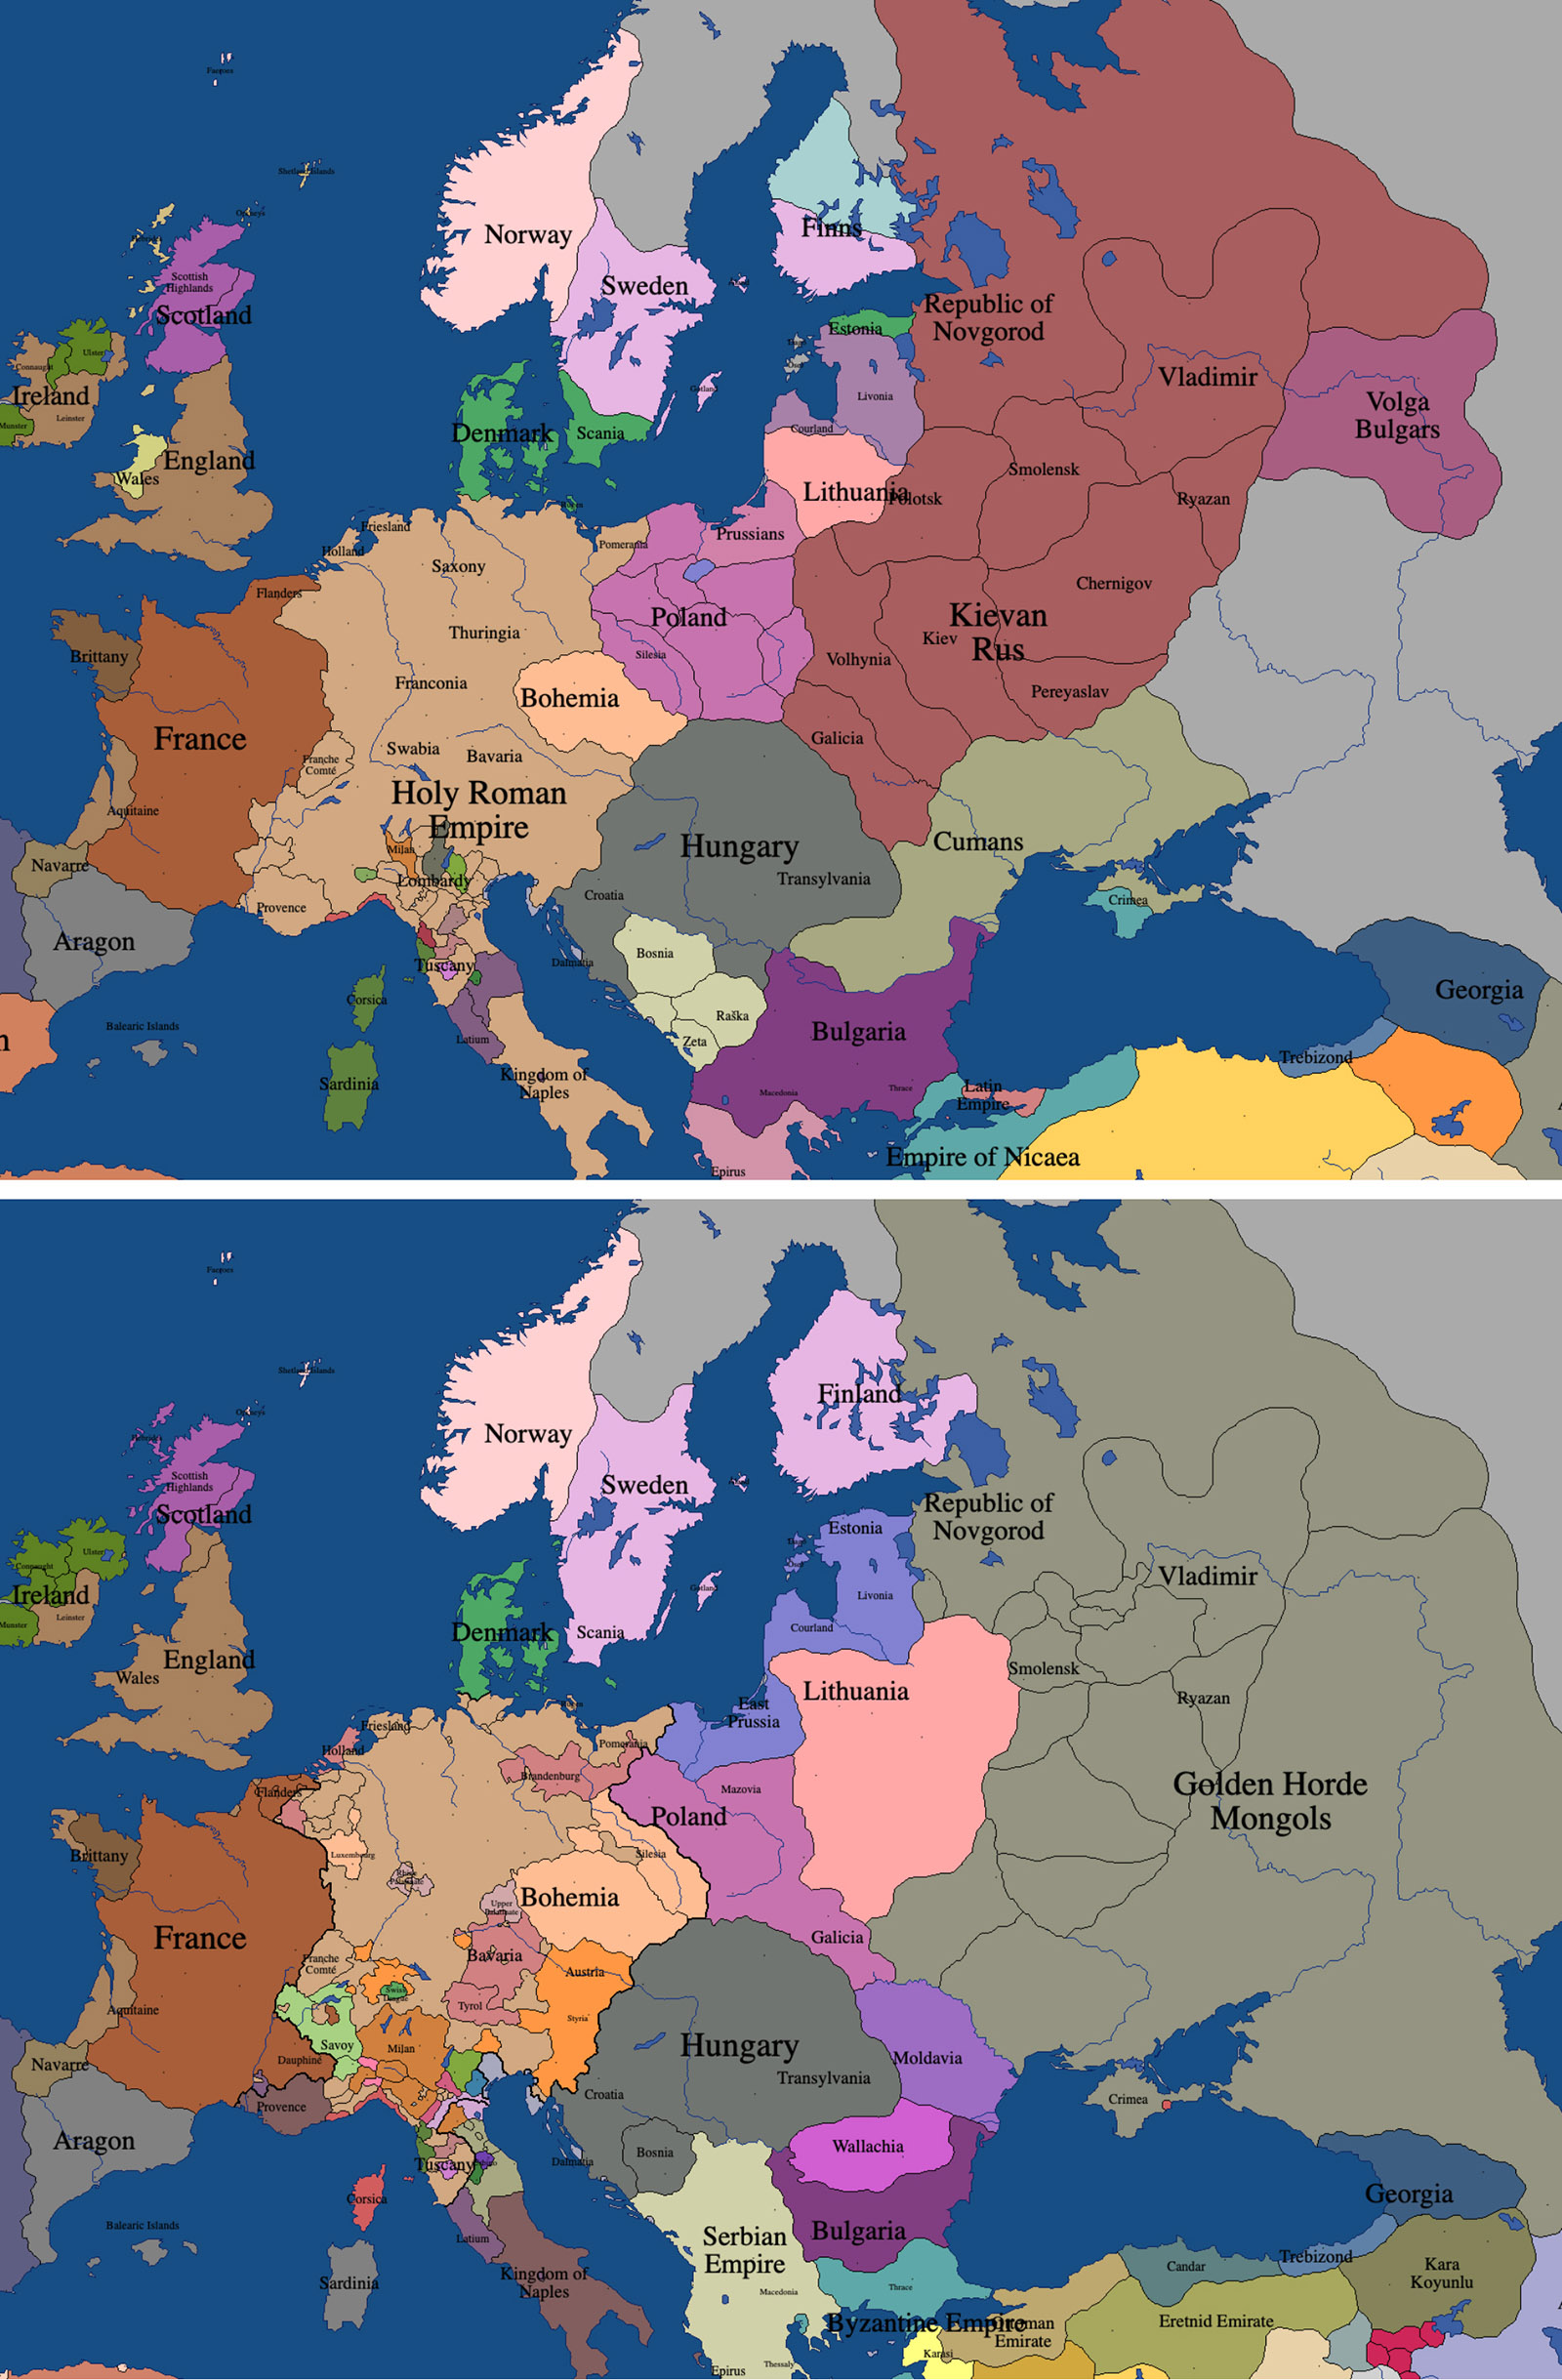 Maps of eastern Europe in 1236 and 1350